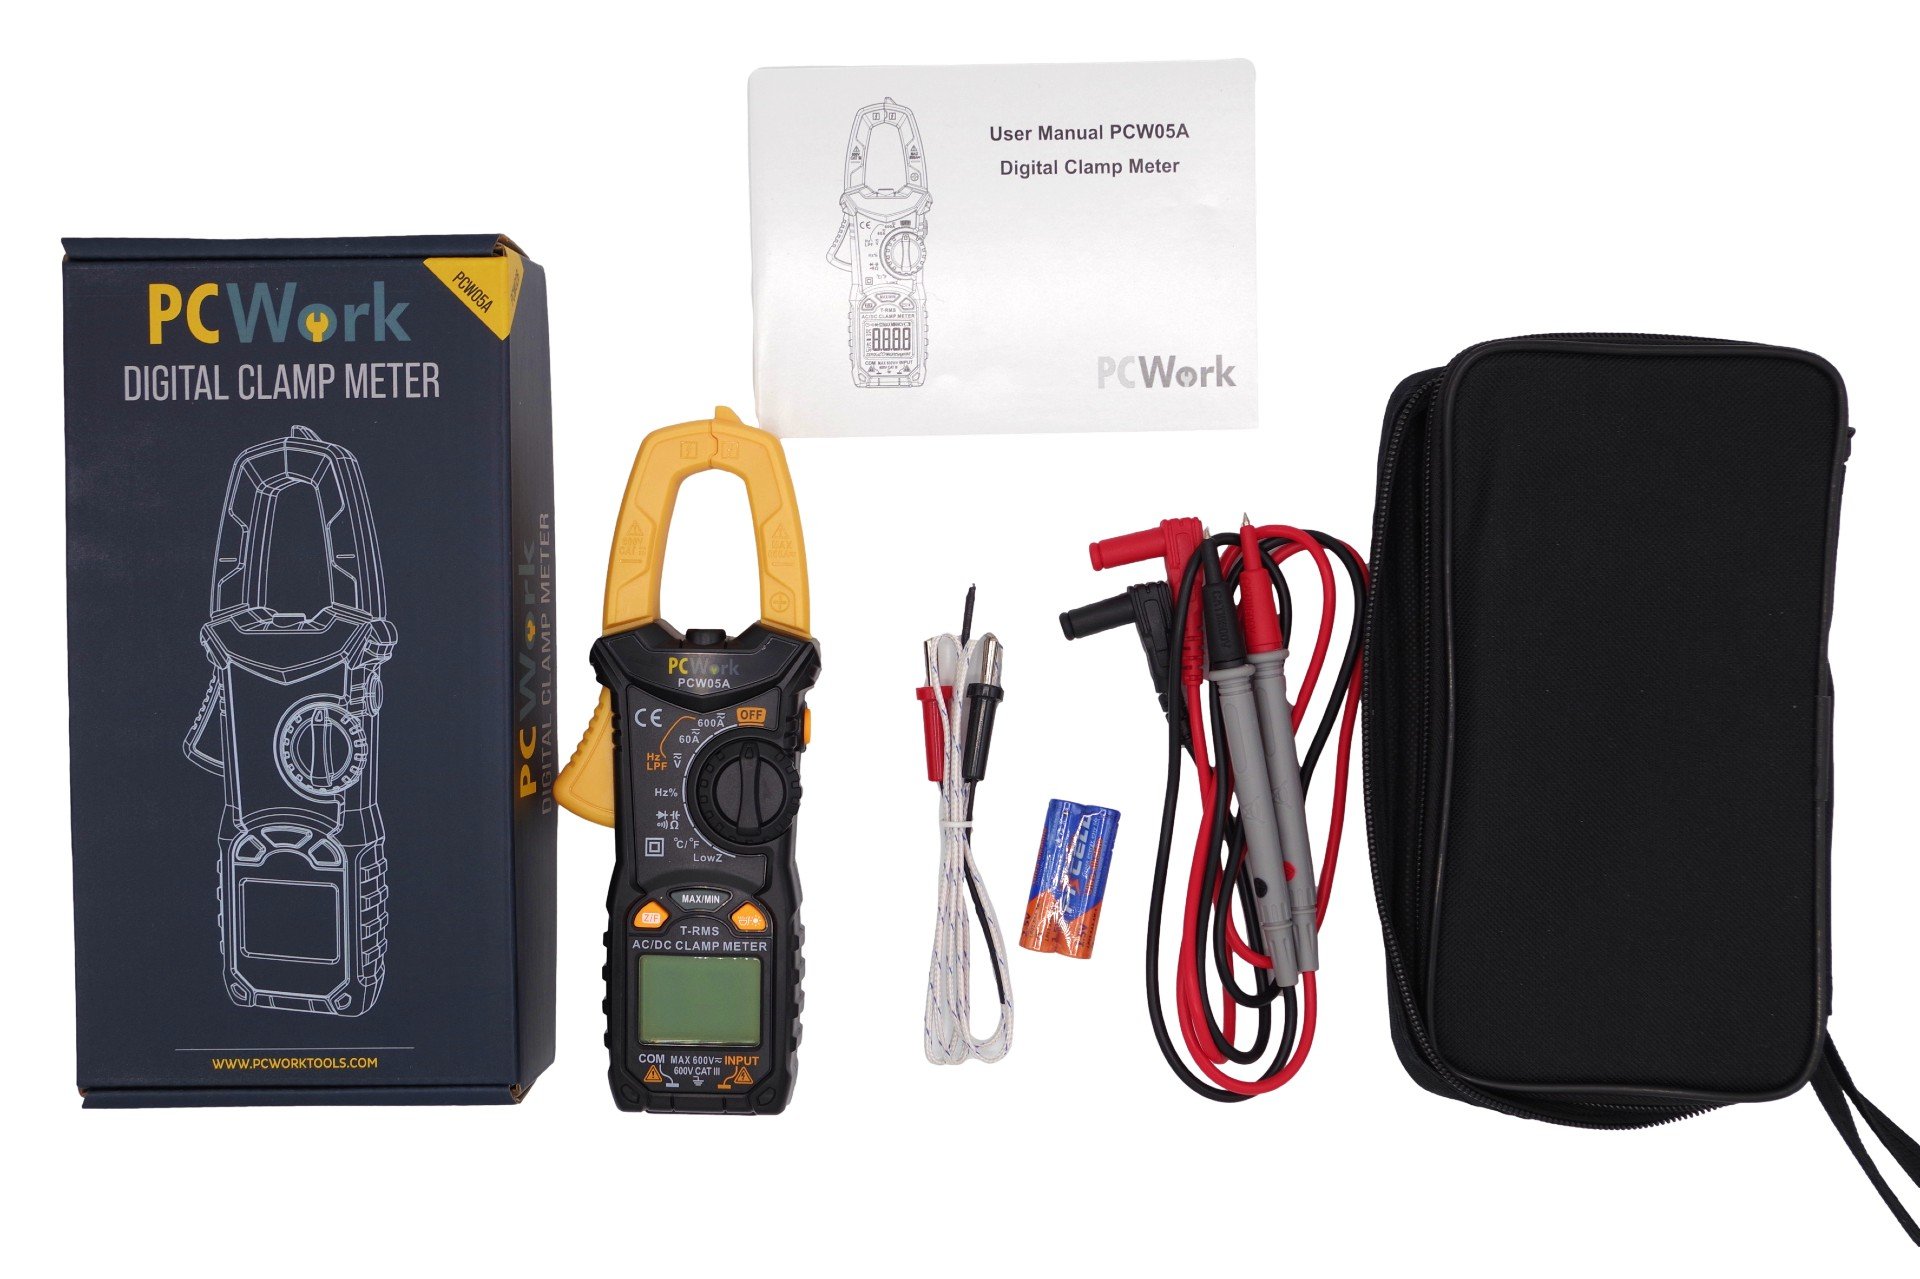 pcw05a-lieferumfang-included-parts-digital-clamp-meter-stromzange-pcwork